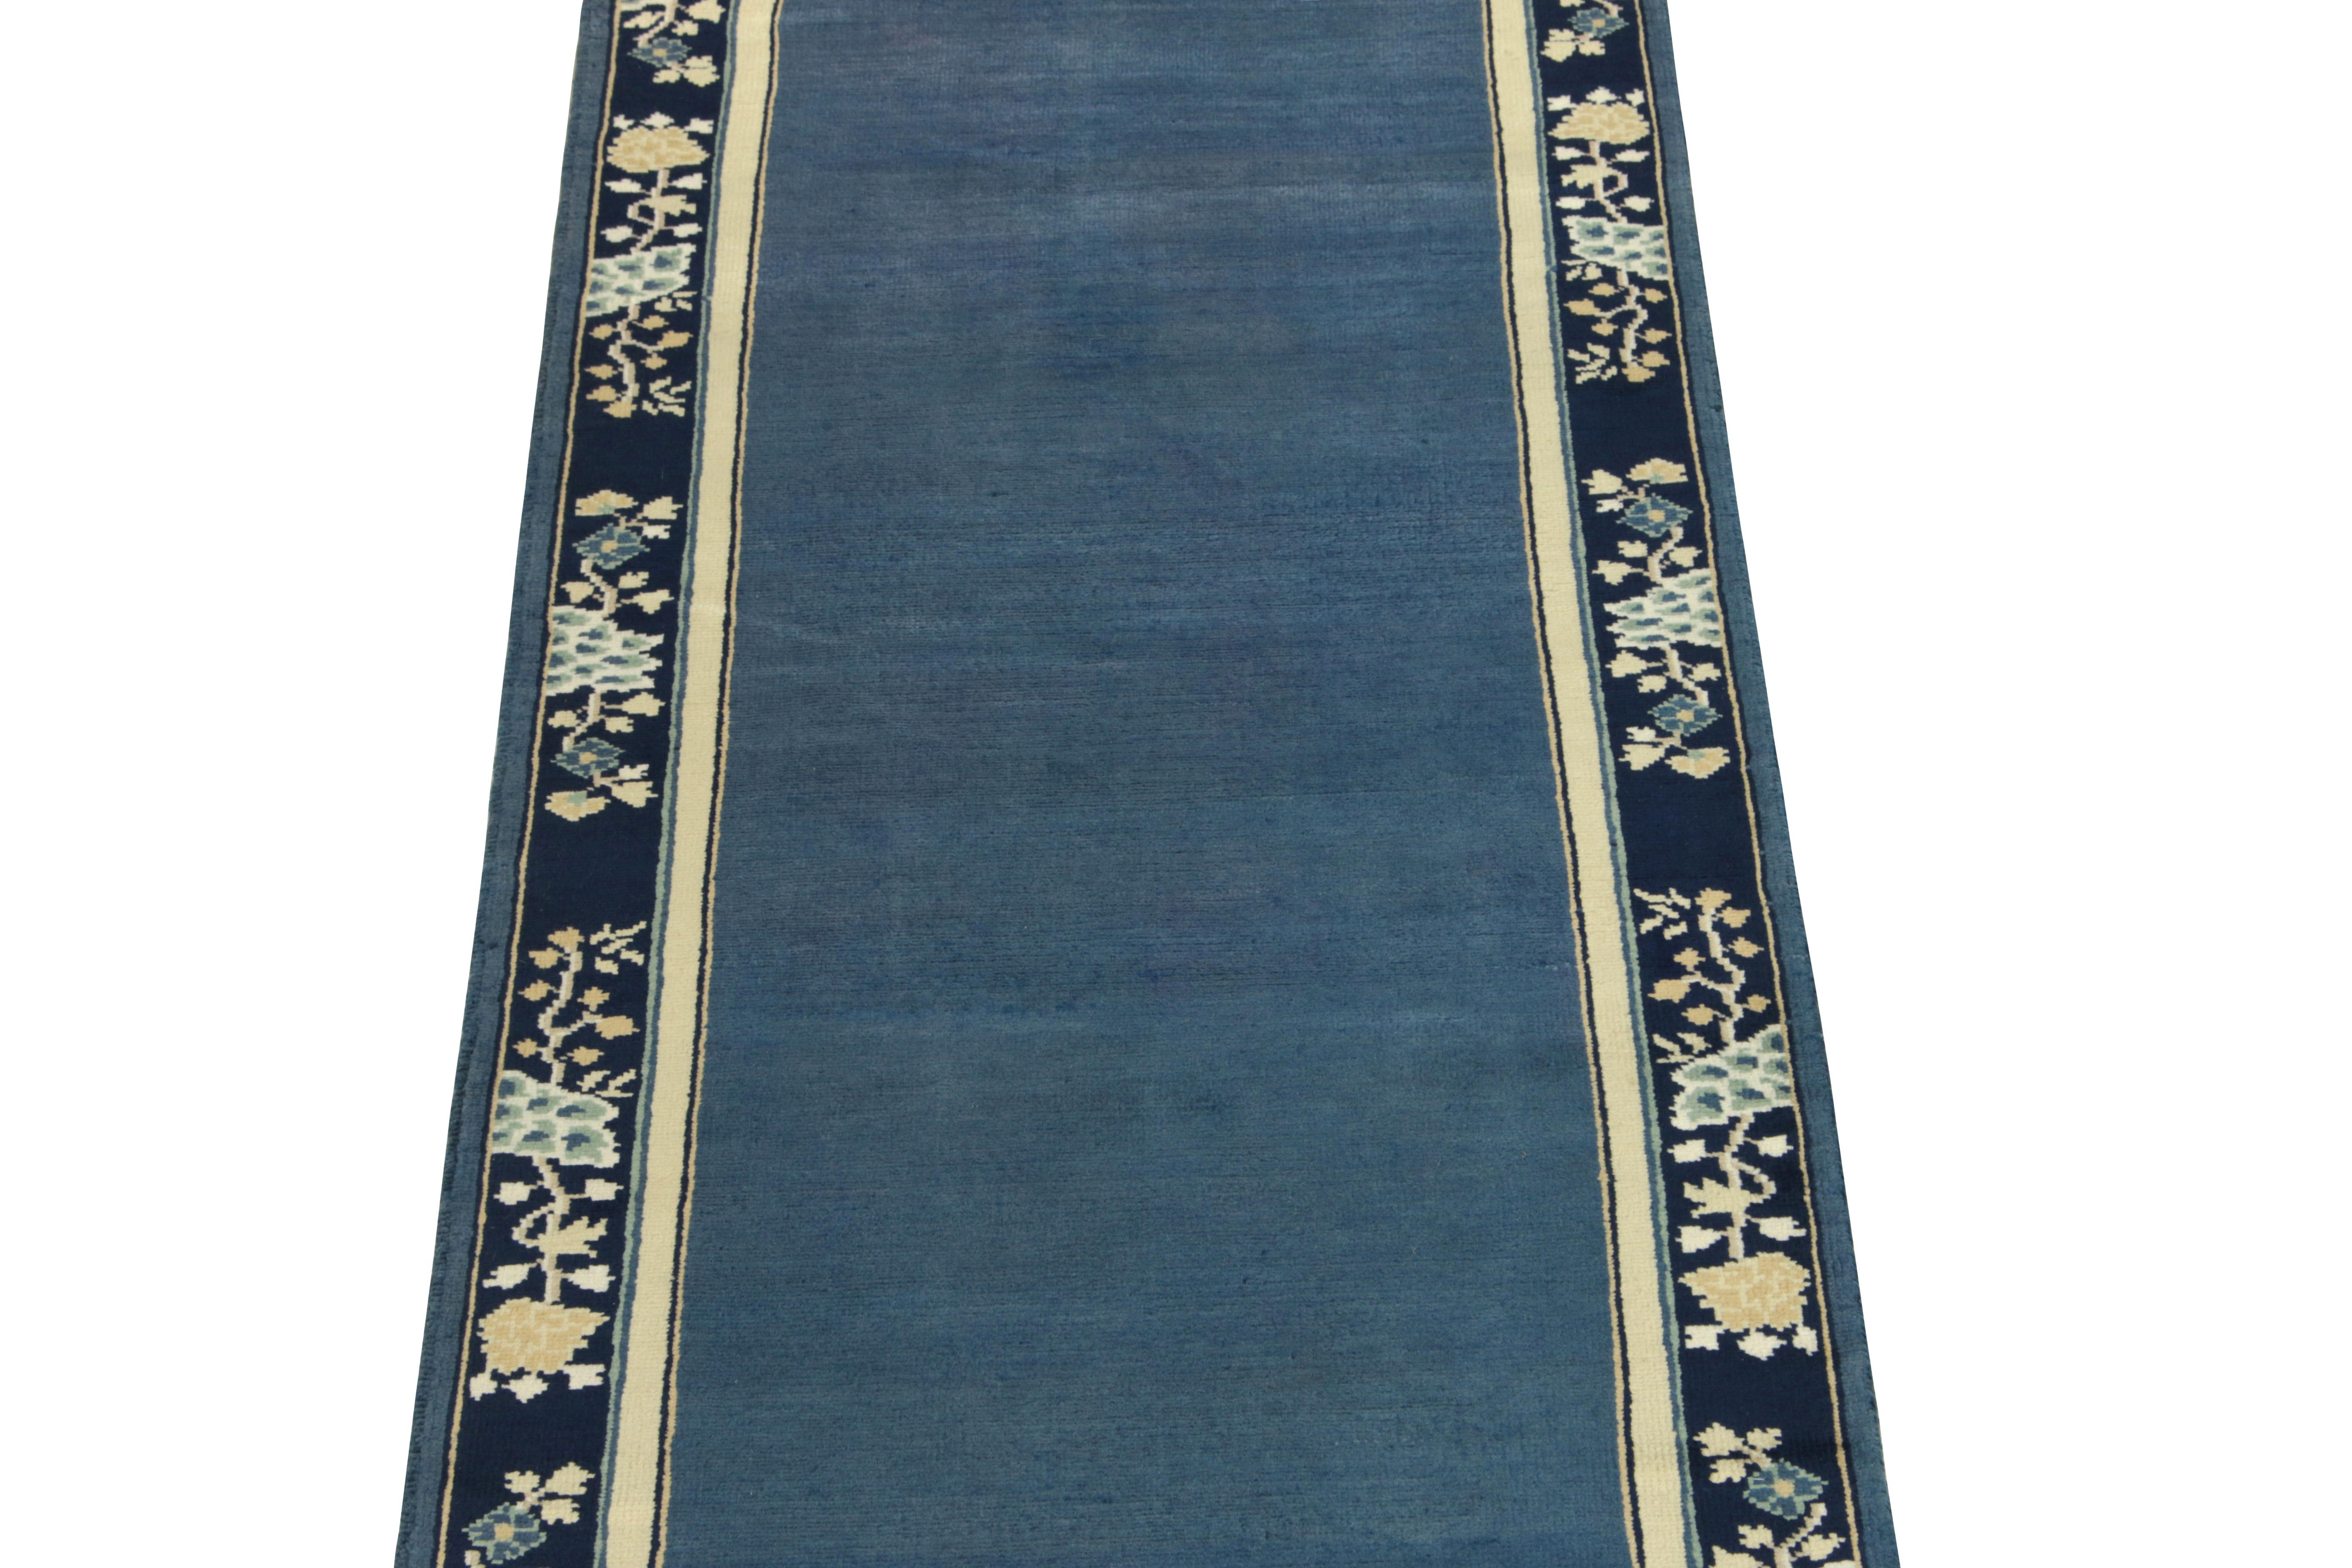 Armenian Vintage Chinese Deco Style Runner in Deep Blue White, Gold Floral by Rug & Kilim For Sale